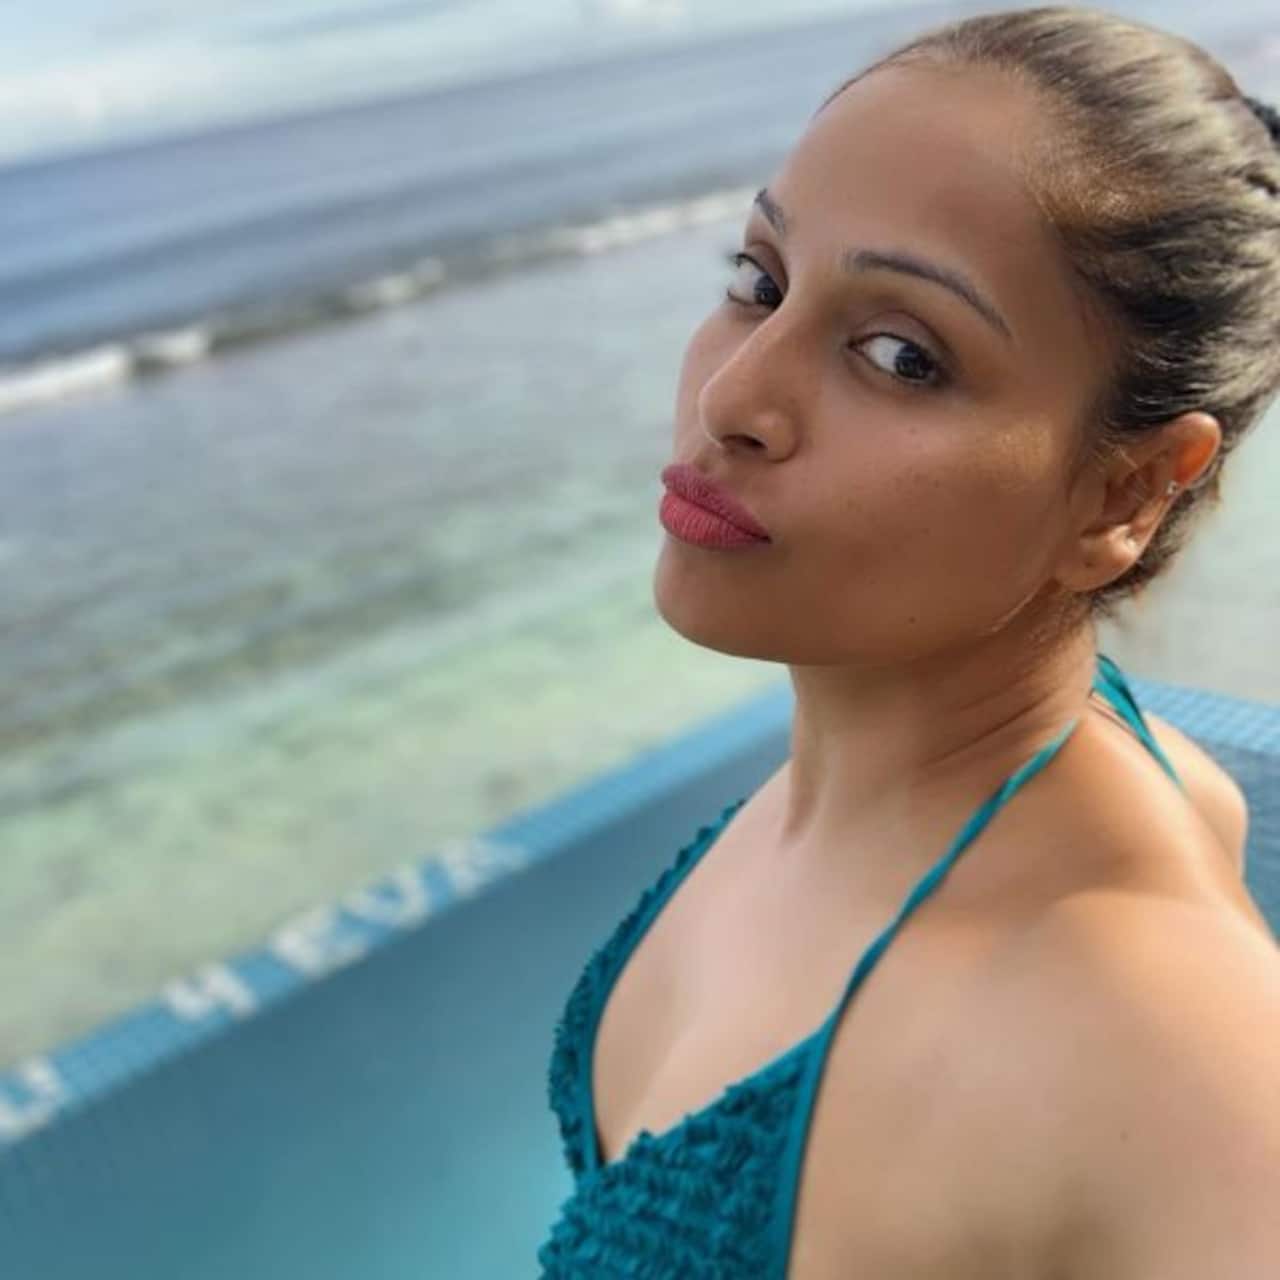 Bipasha Basu Wins Our Hearts With Her No Makeup Pics As She Enjoys Her Vacation With Hubby Karan